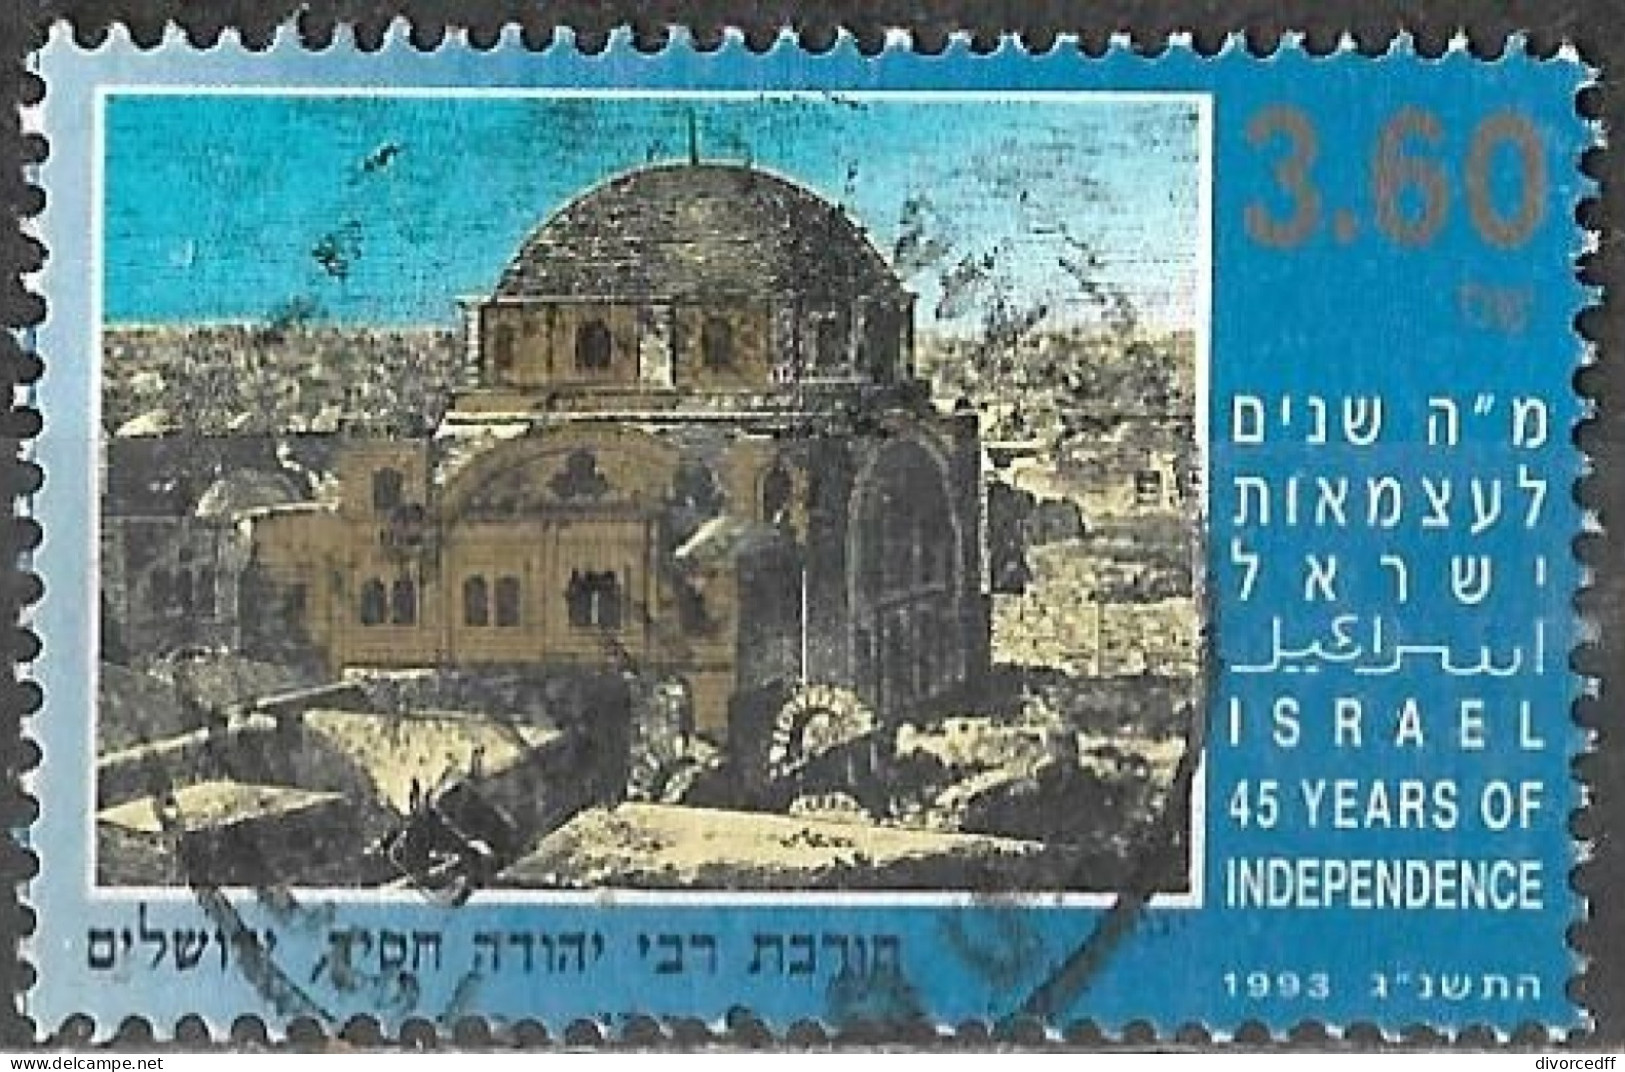 Israel 1993 Used Stamp Israel 45 Years Of Independence Architecture [INLT56] - Usati (senza Tab)